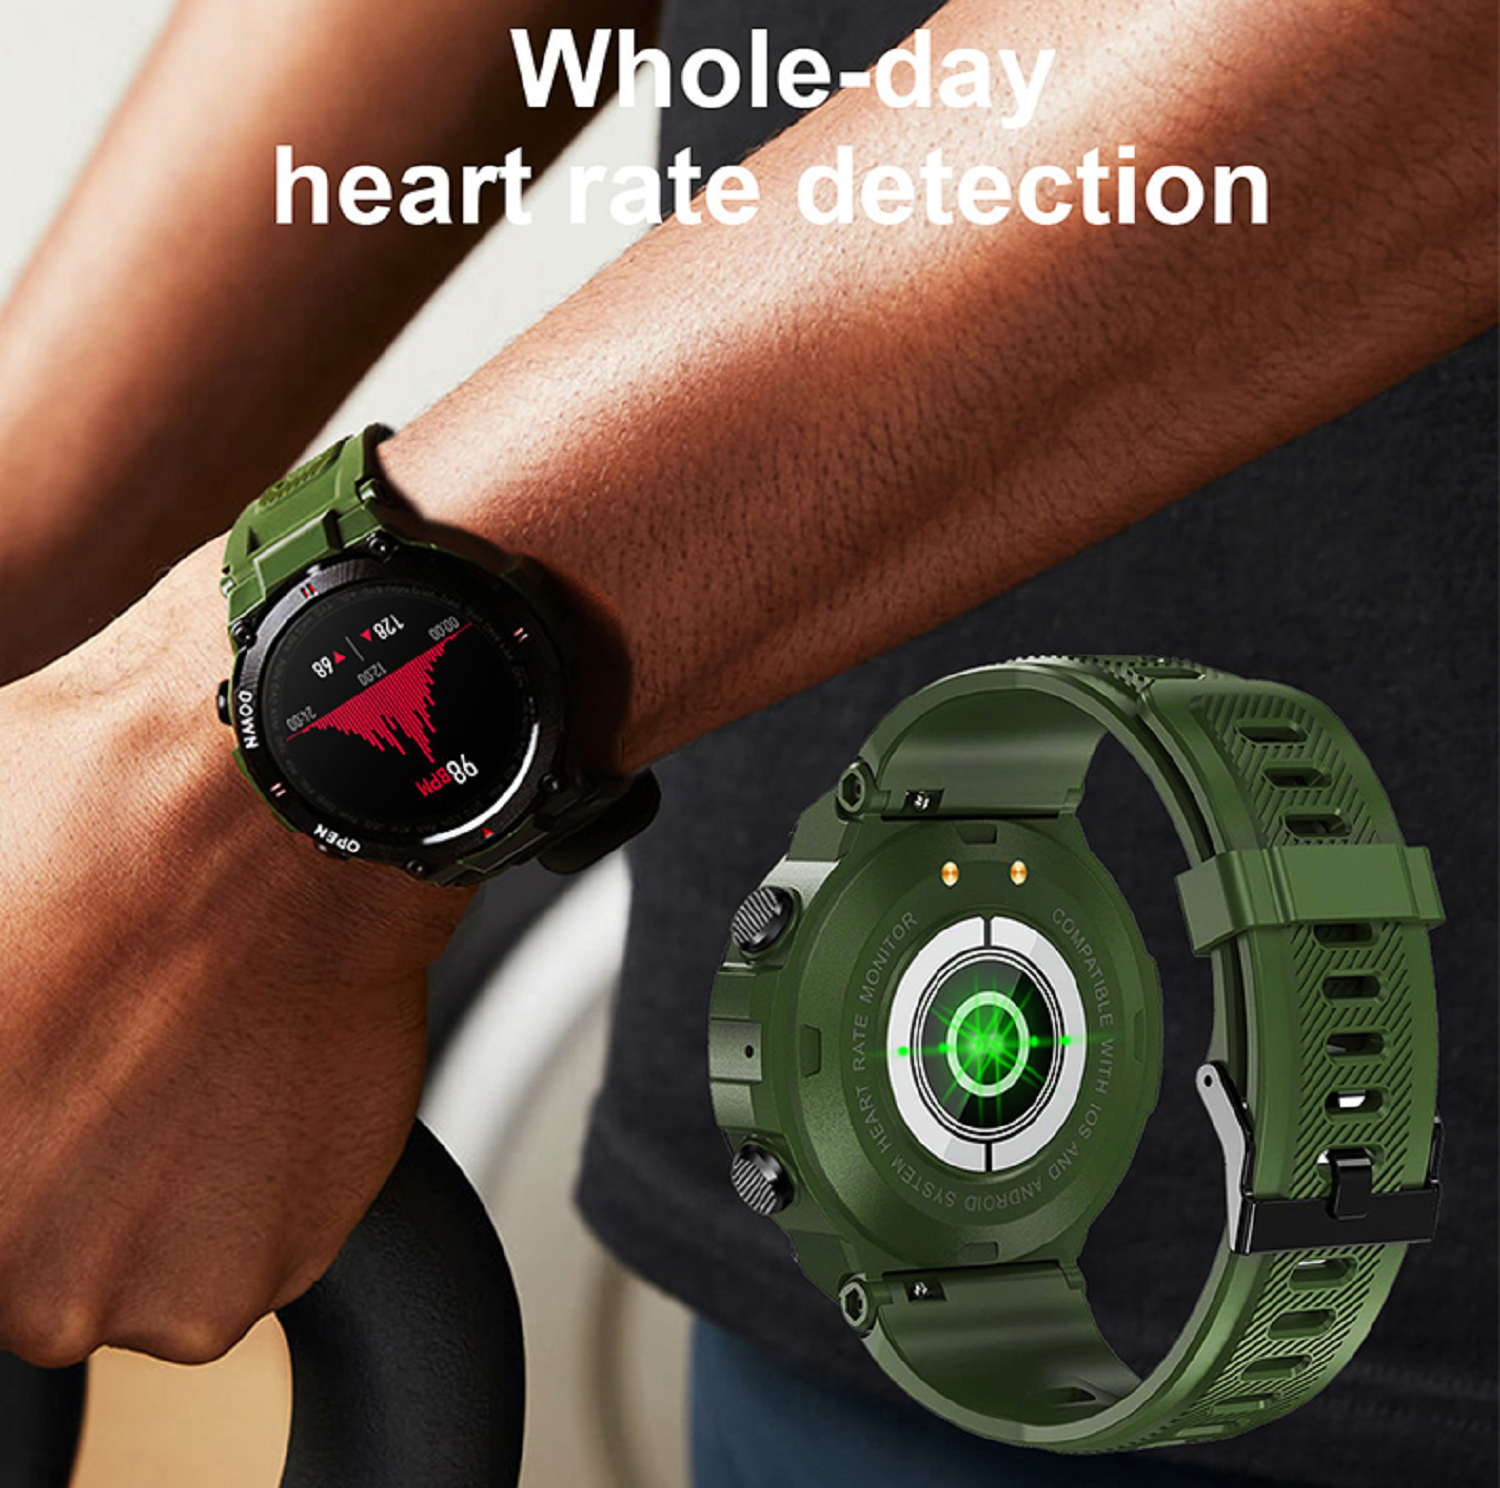 Robuste K22 Health Smartwatch: Take charge of your well-being with comprehensive health monitoring. | Blue Chilli Electronics.